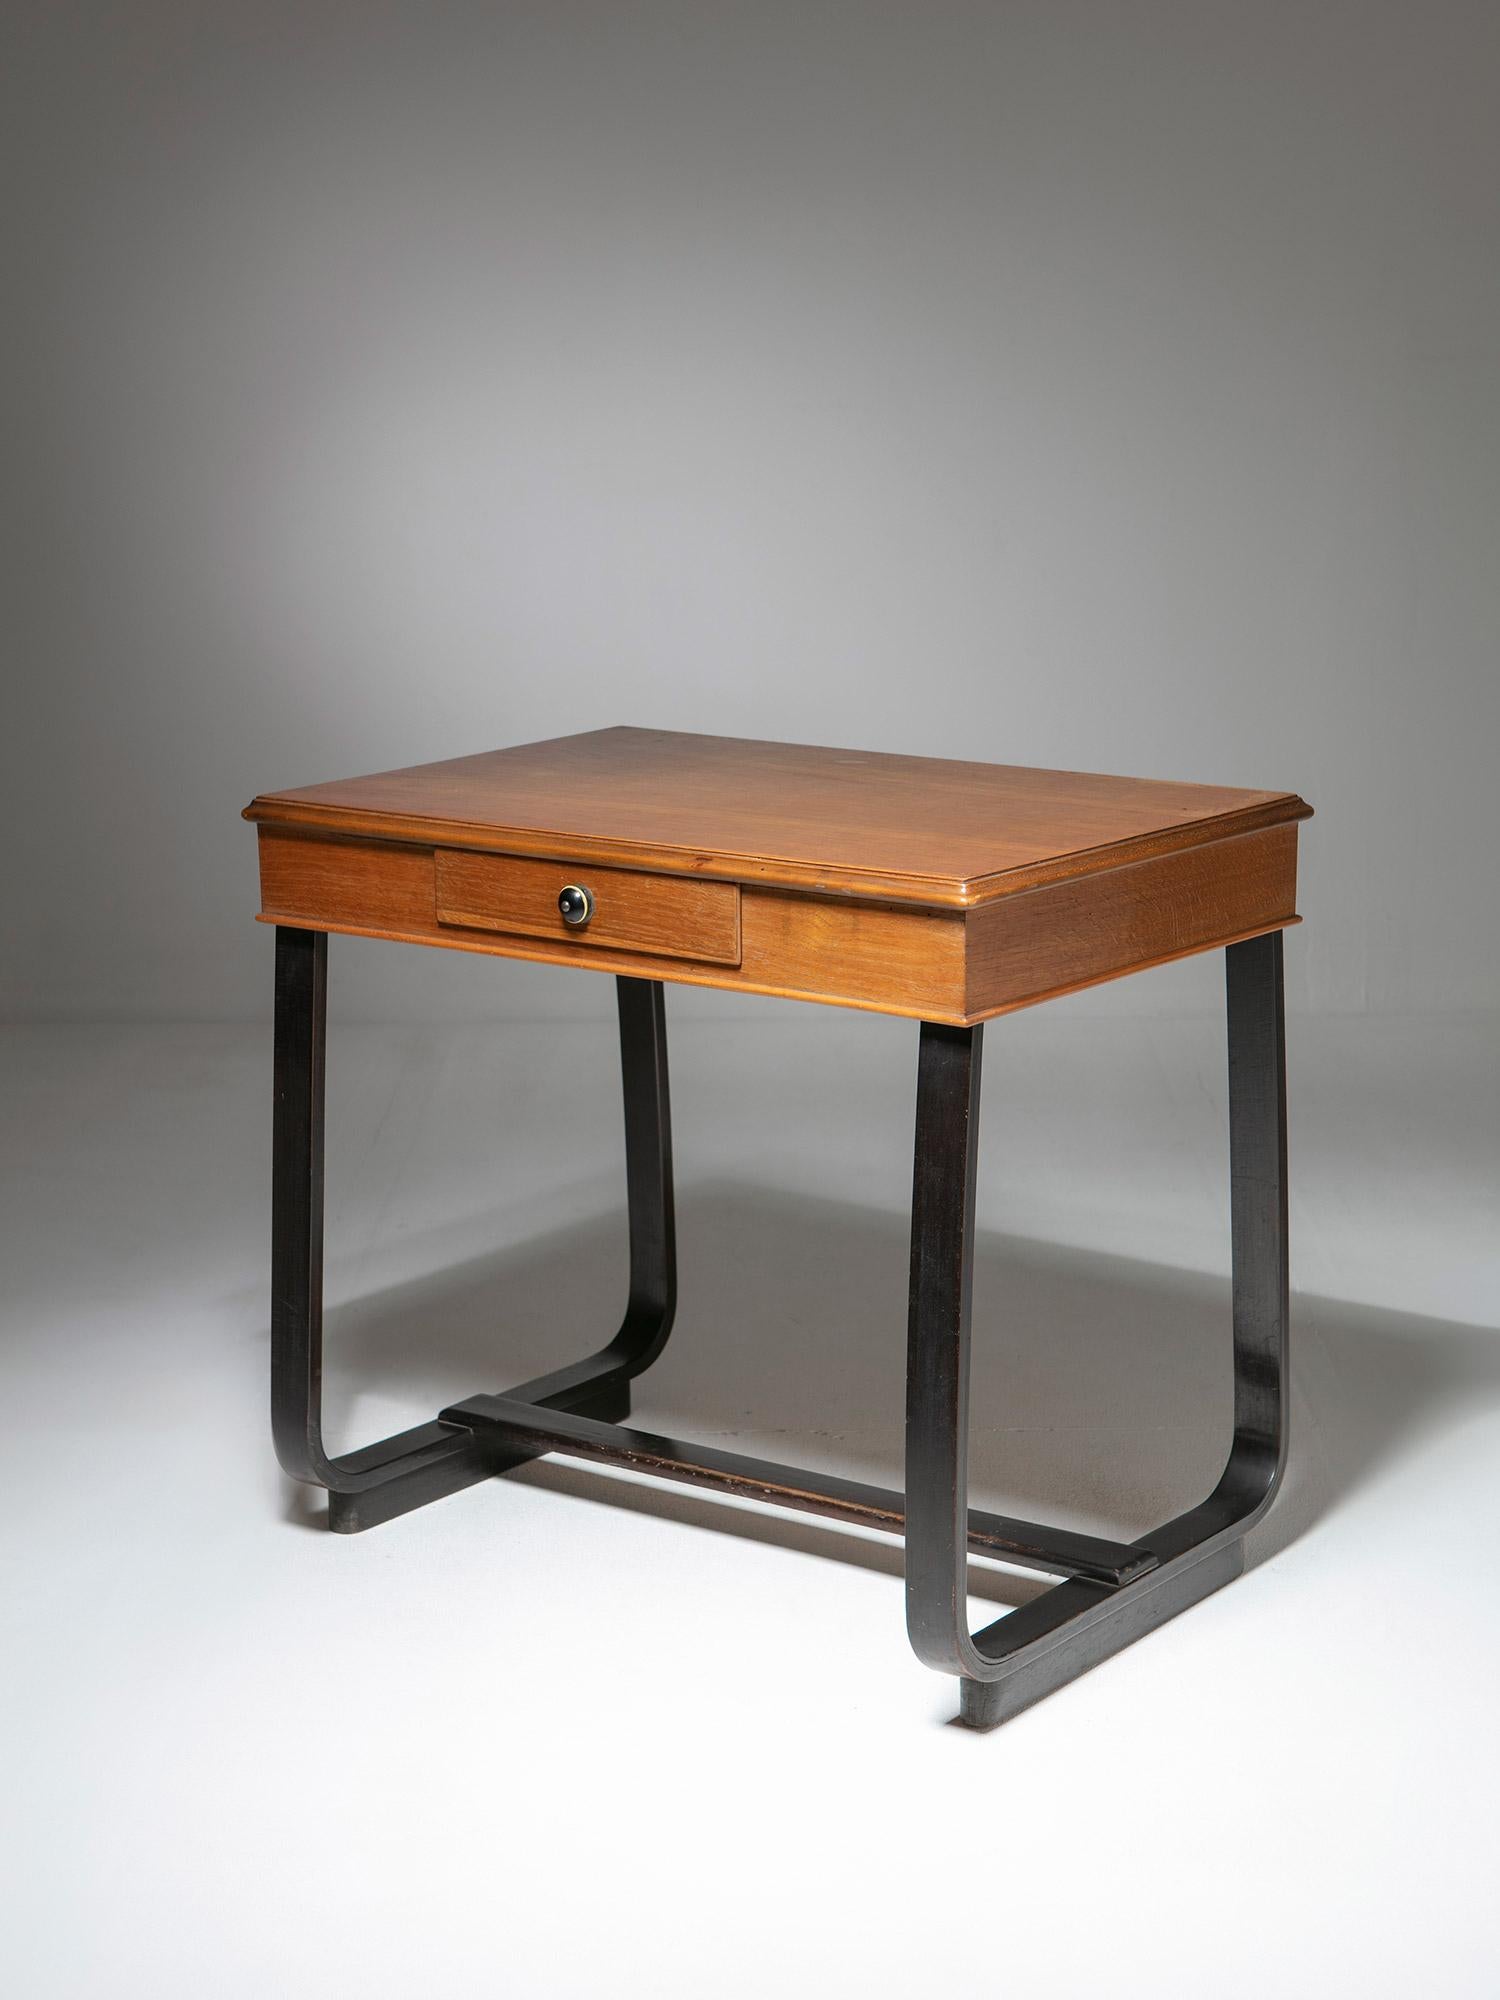 Italian 1940s desk featuring plywood legs and one drawer.
Shape and proportions resemble the work of Giuseppe Pagano.